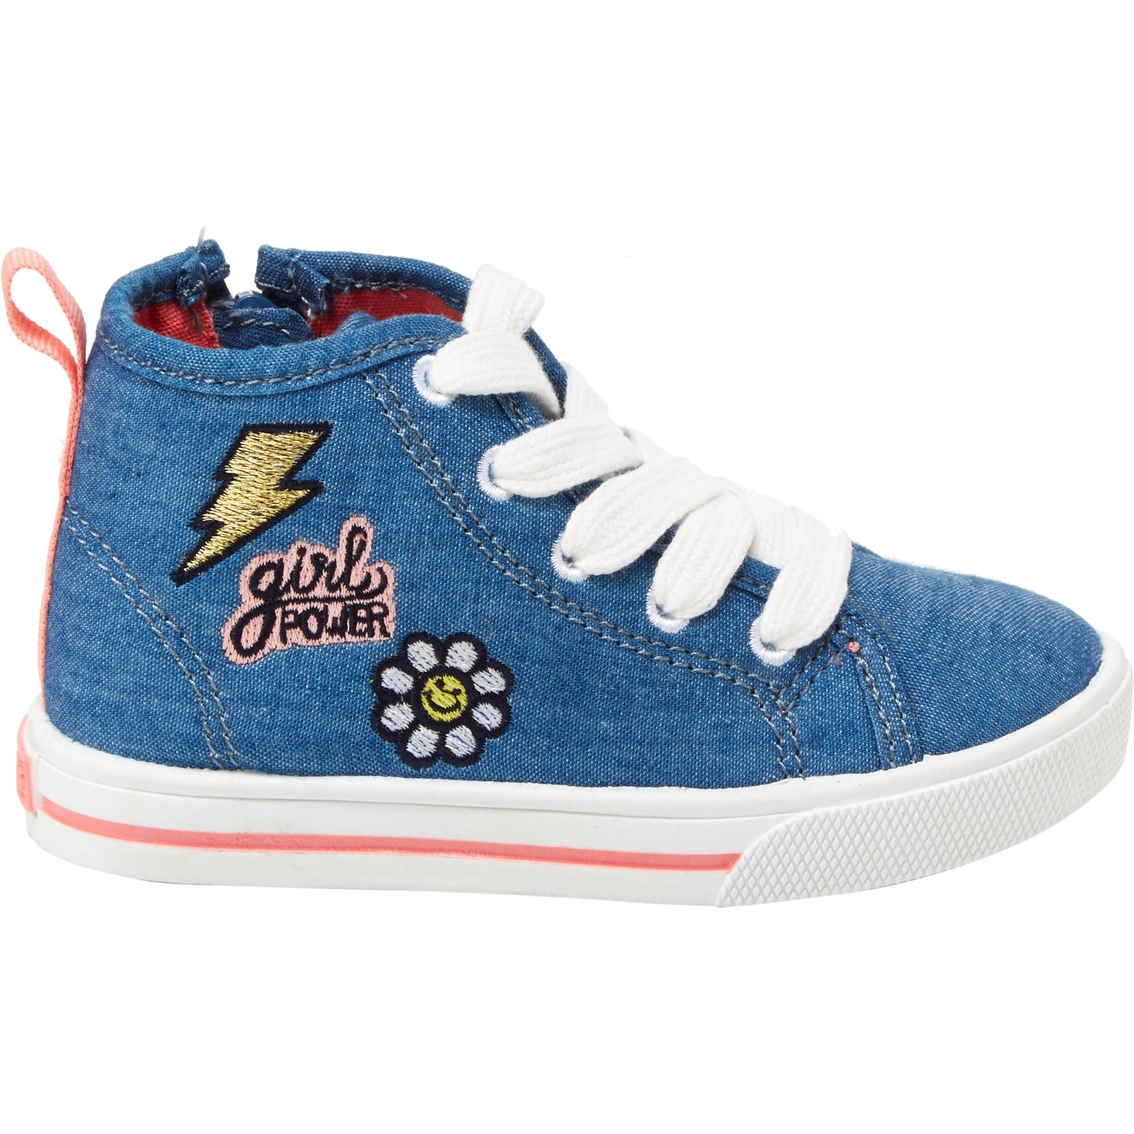 Carter's Toddler Girls High Top Sneakers - Image 2 of 4